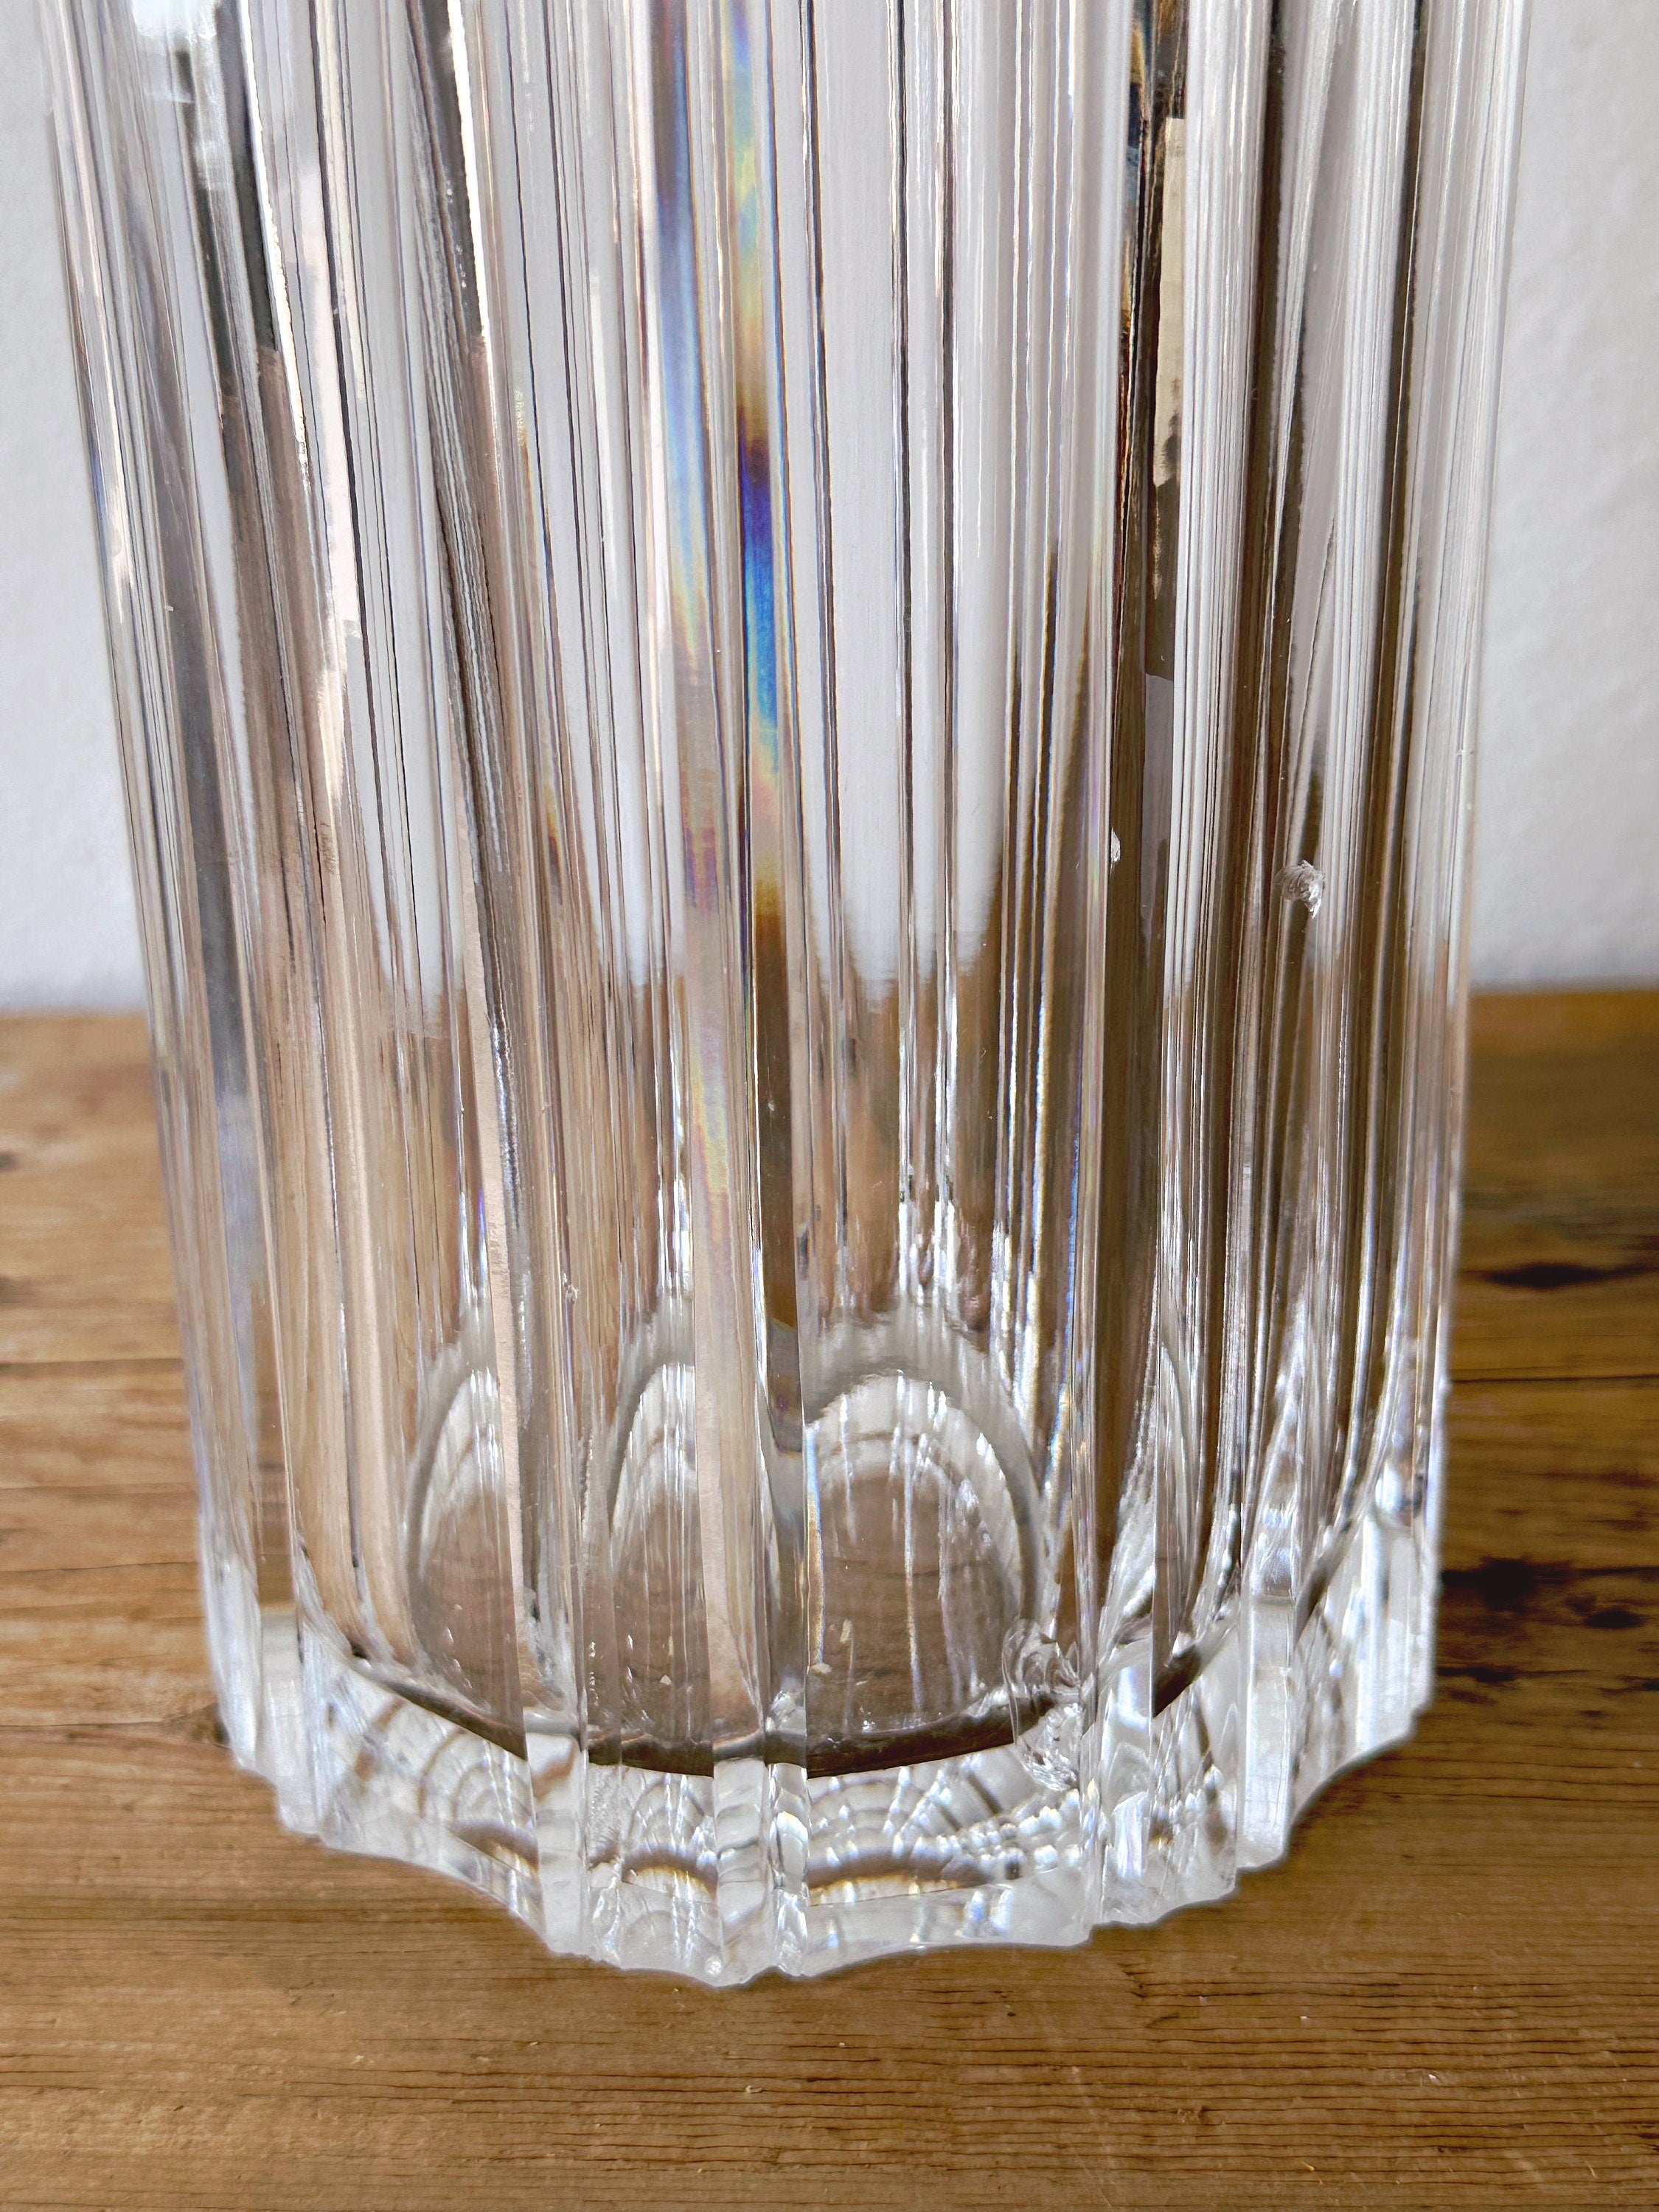 Vintage Premium Clear Cut Crystal Vase | Heavy Cylindrical Flower Vase with Arches Pattern | Housewarming Gift For Her Wedding Decor